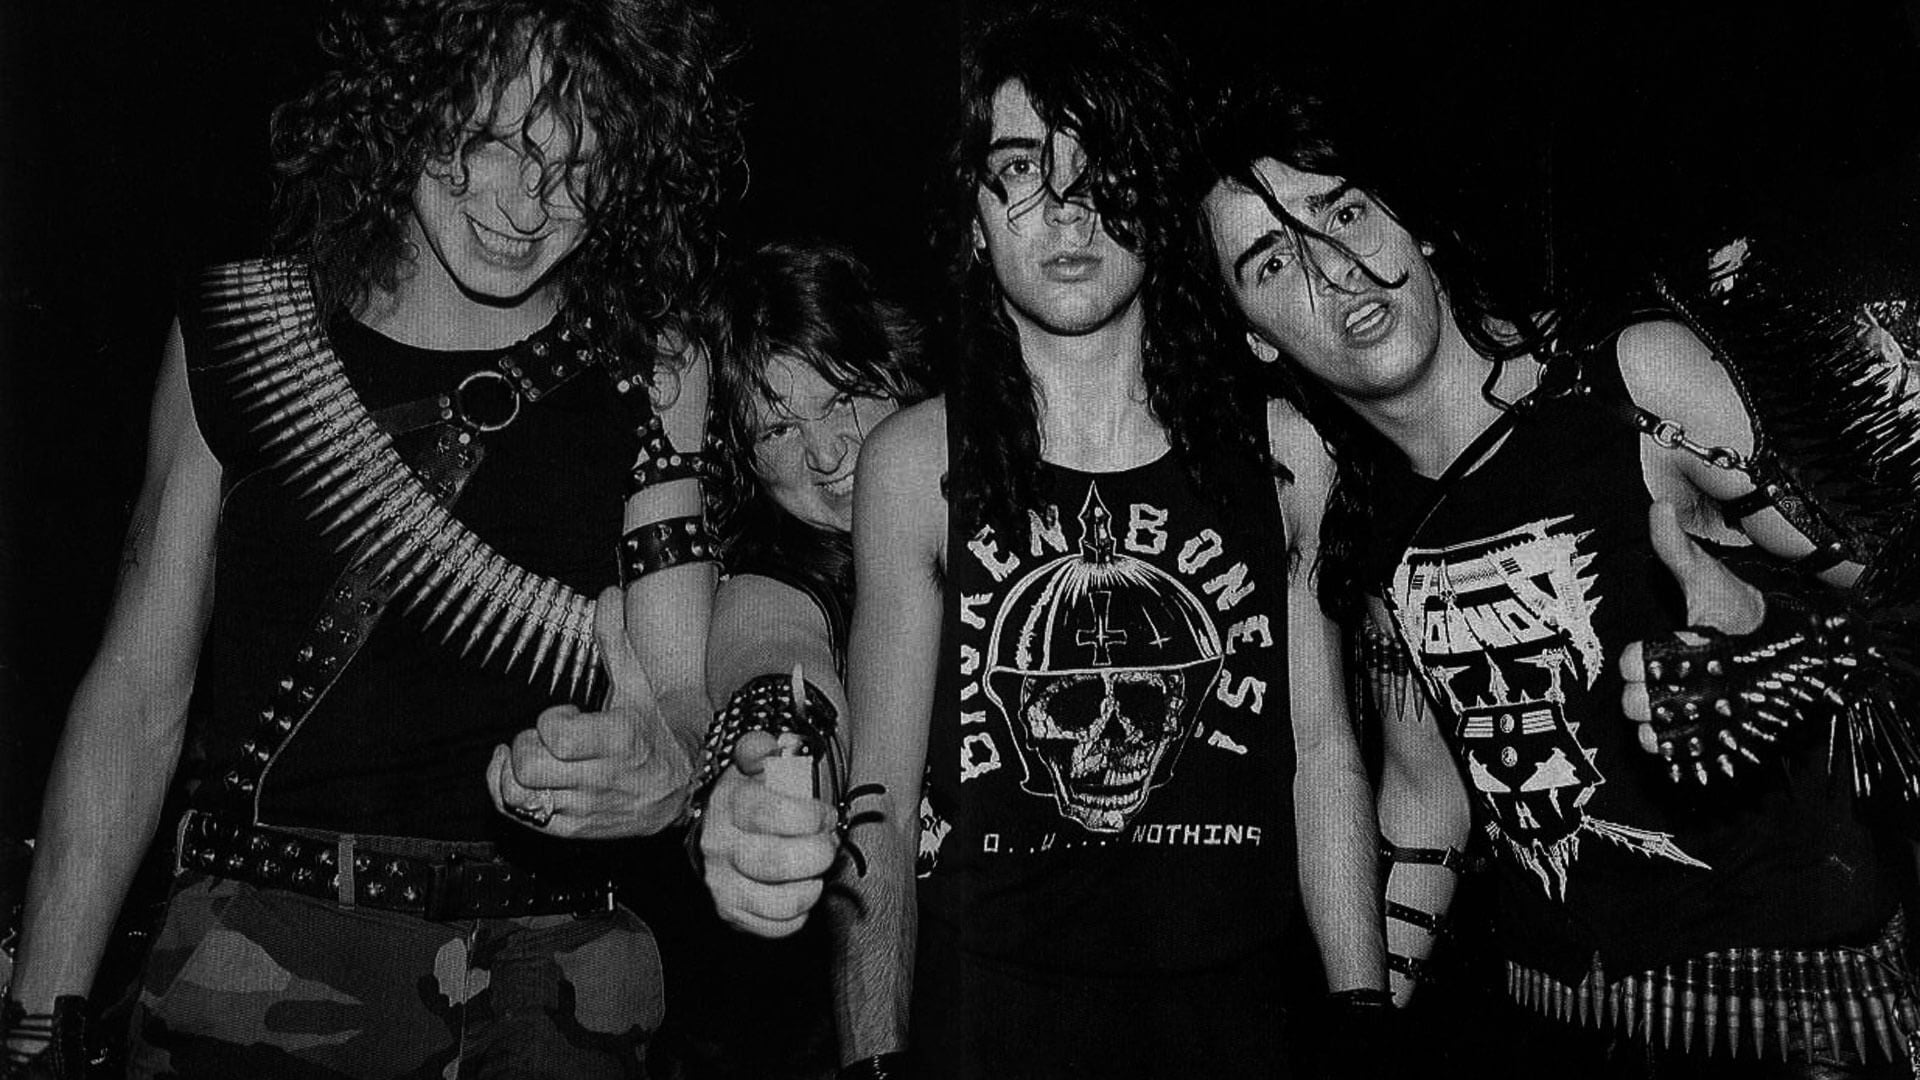 31 Years Ago: VOIVOD release Rrroooaaarrr (and there's no chance